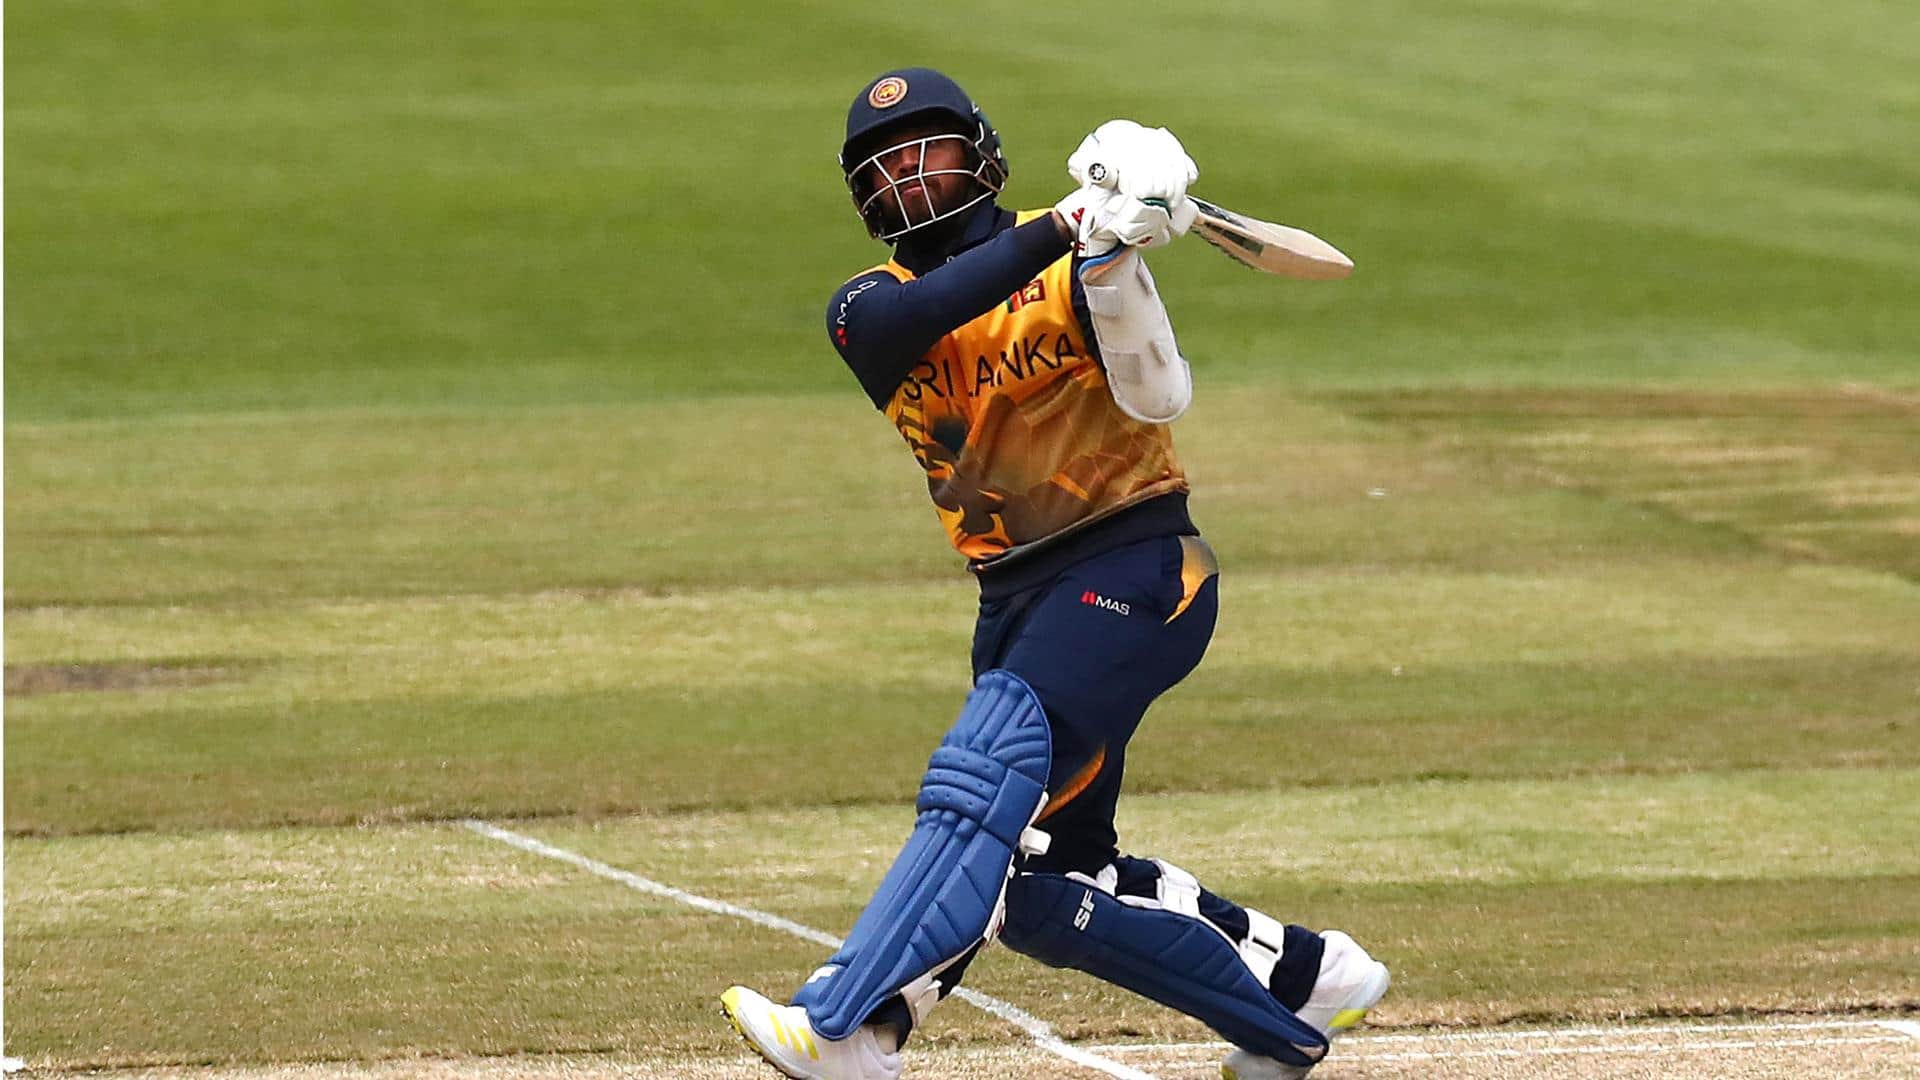 CWC Qualifiers: Kusal Mendis smashes a fiery 78 versus UAE